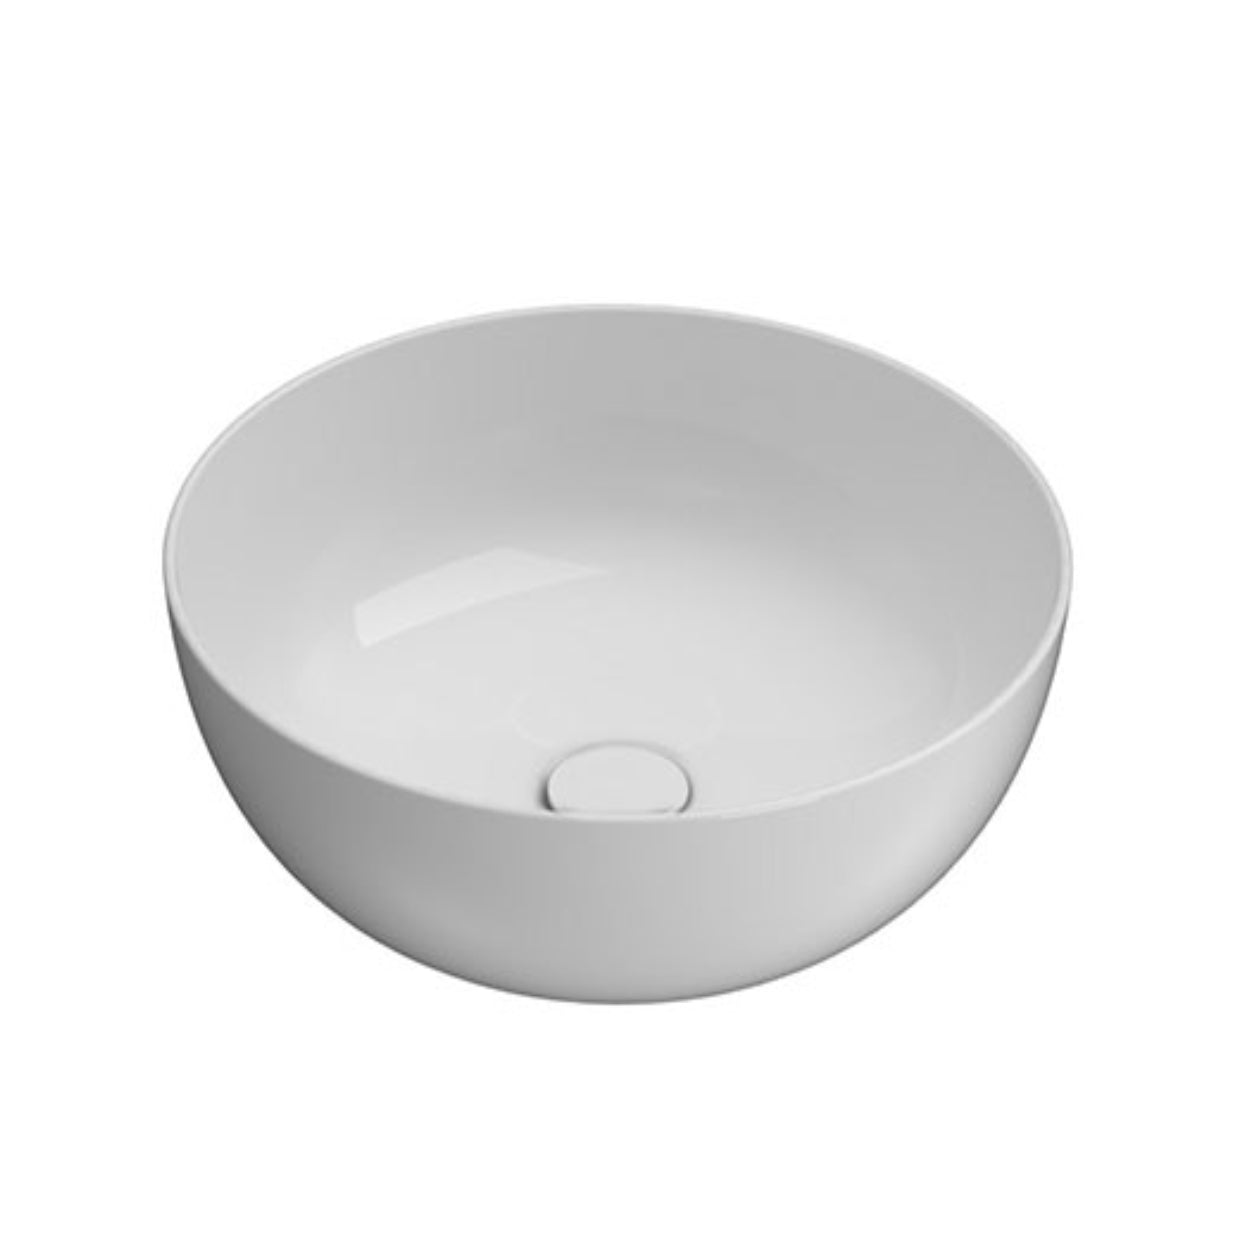 T-Edge Round Countertop Basin by Globo | Bench top Bowl, Vessel Basin